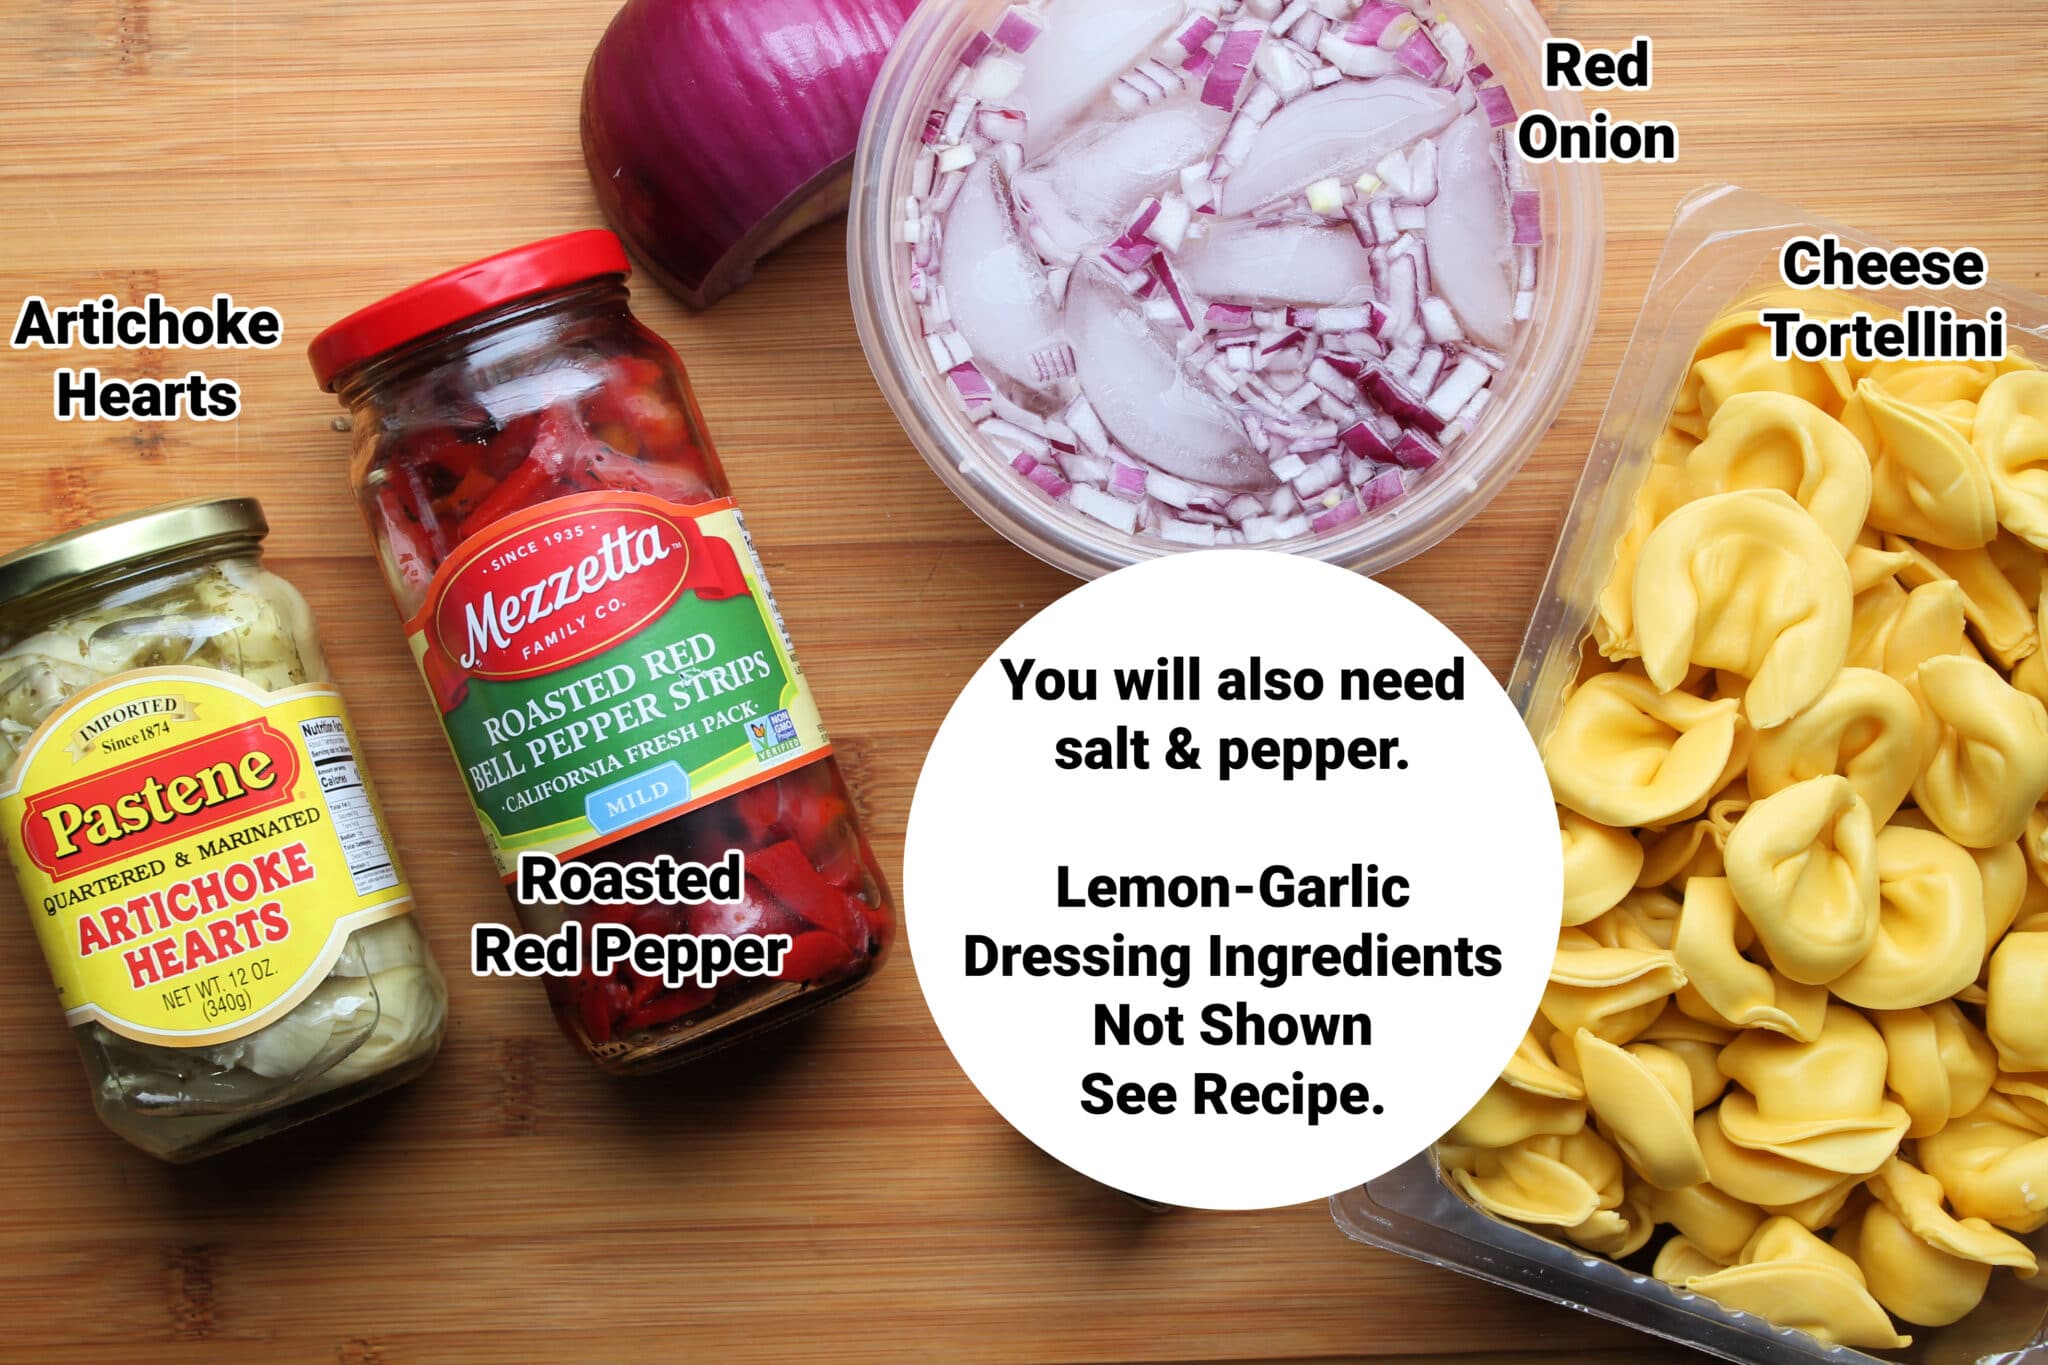 ingredients for tortellini pasta salad on wood cutting board